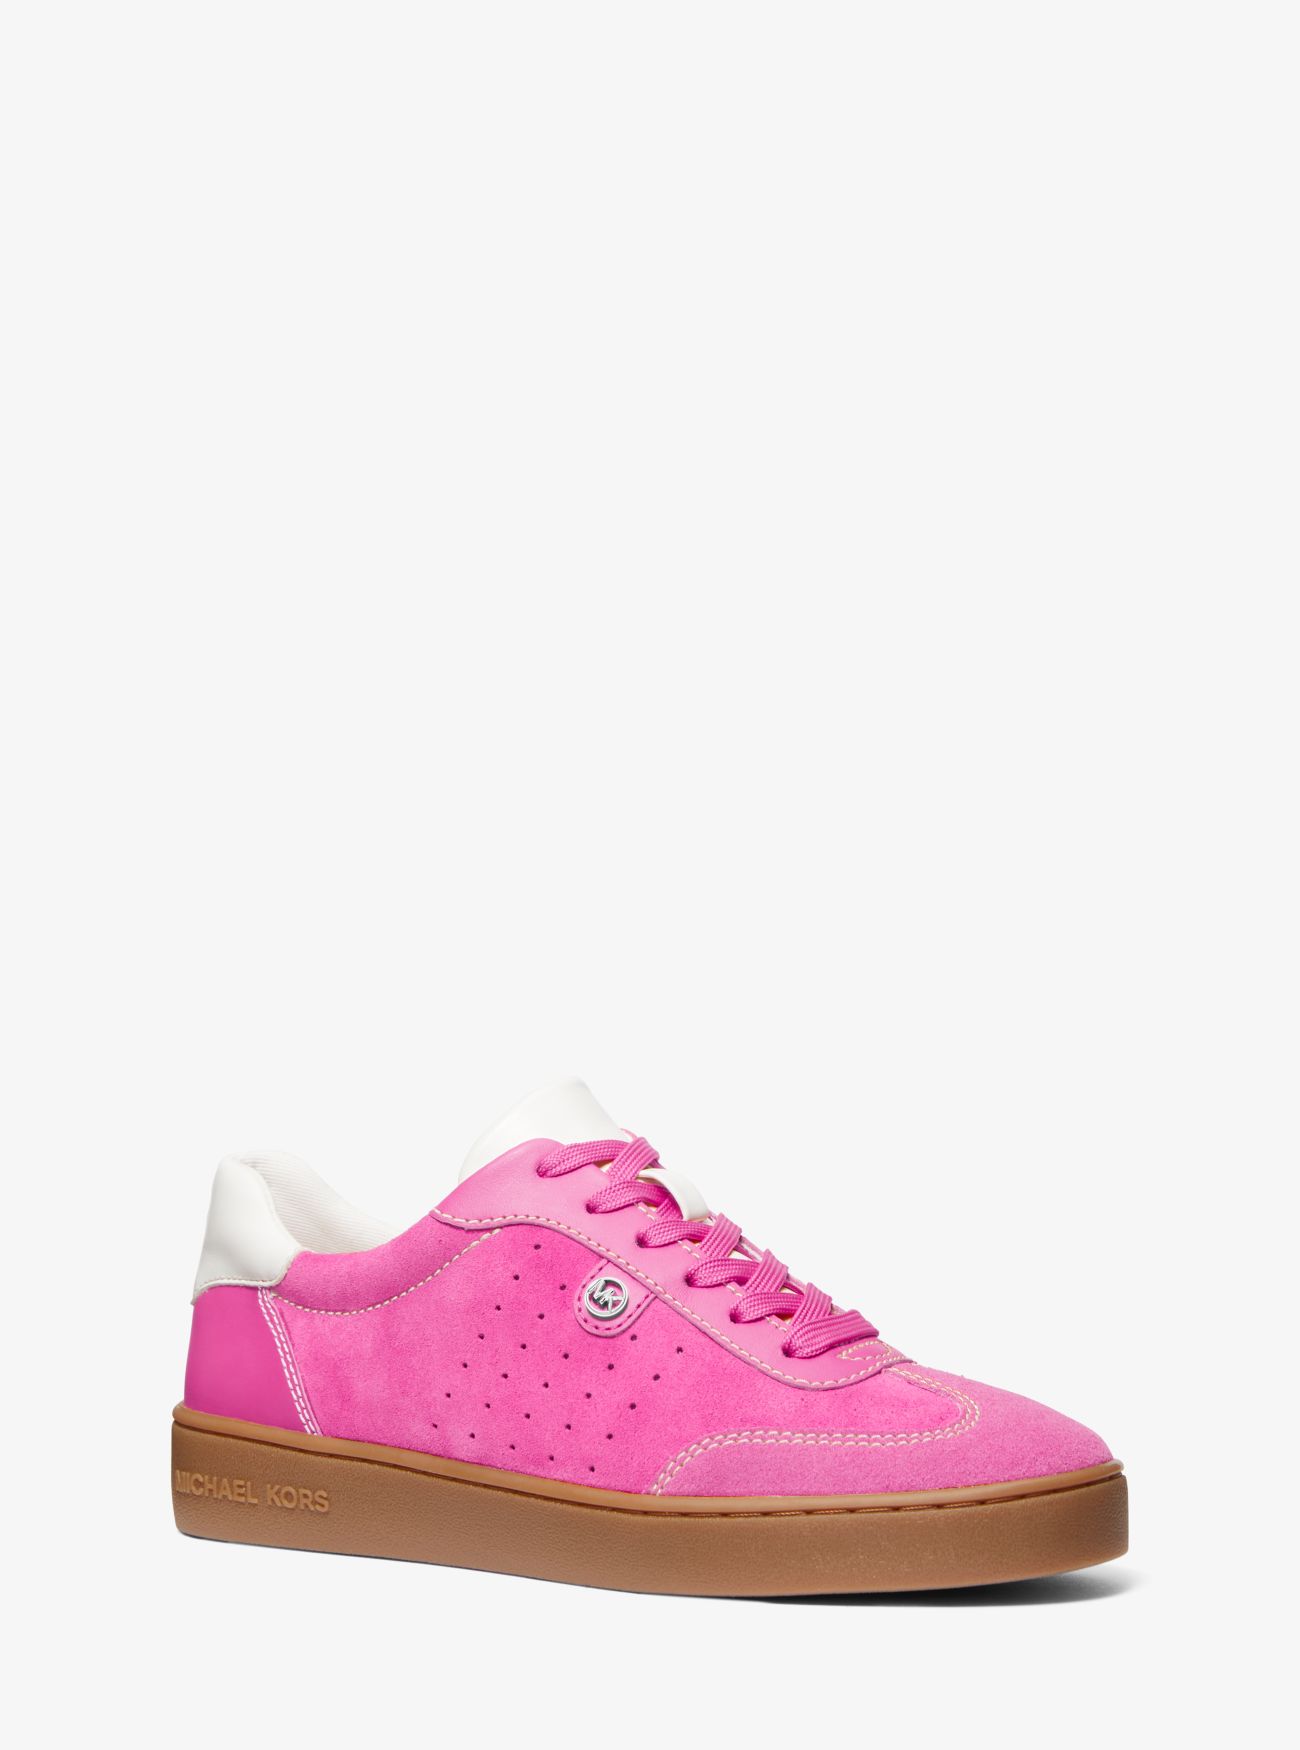 MK Scotty Suede Trainers - Pink - Michael Kors